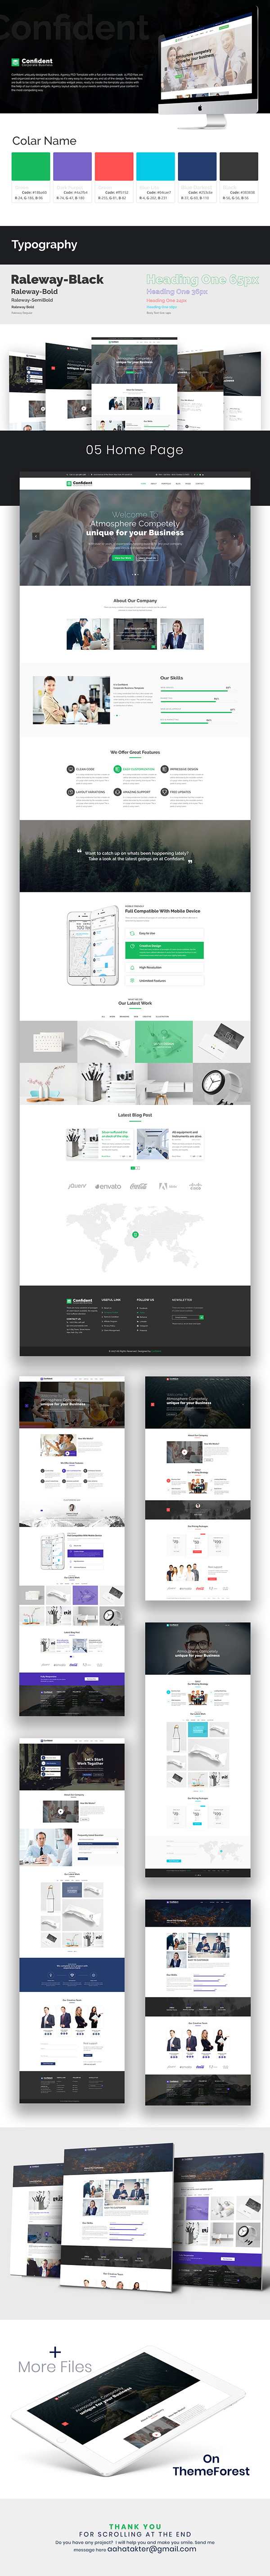 Confident - Business & Agency Template